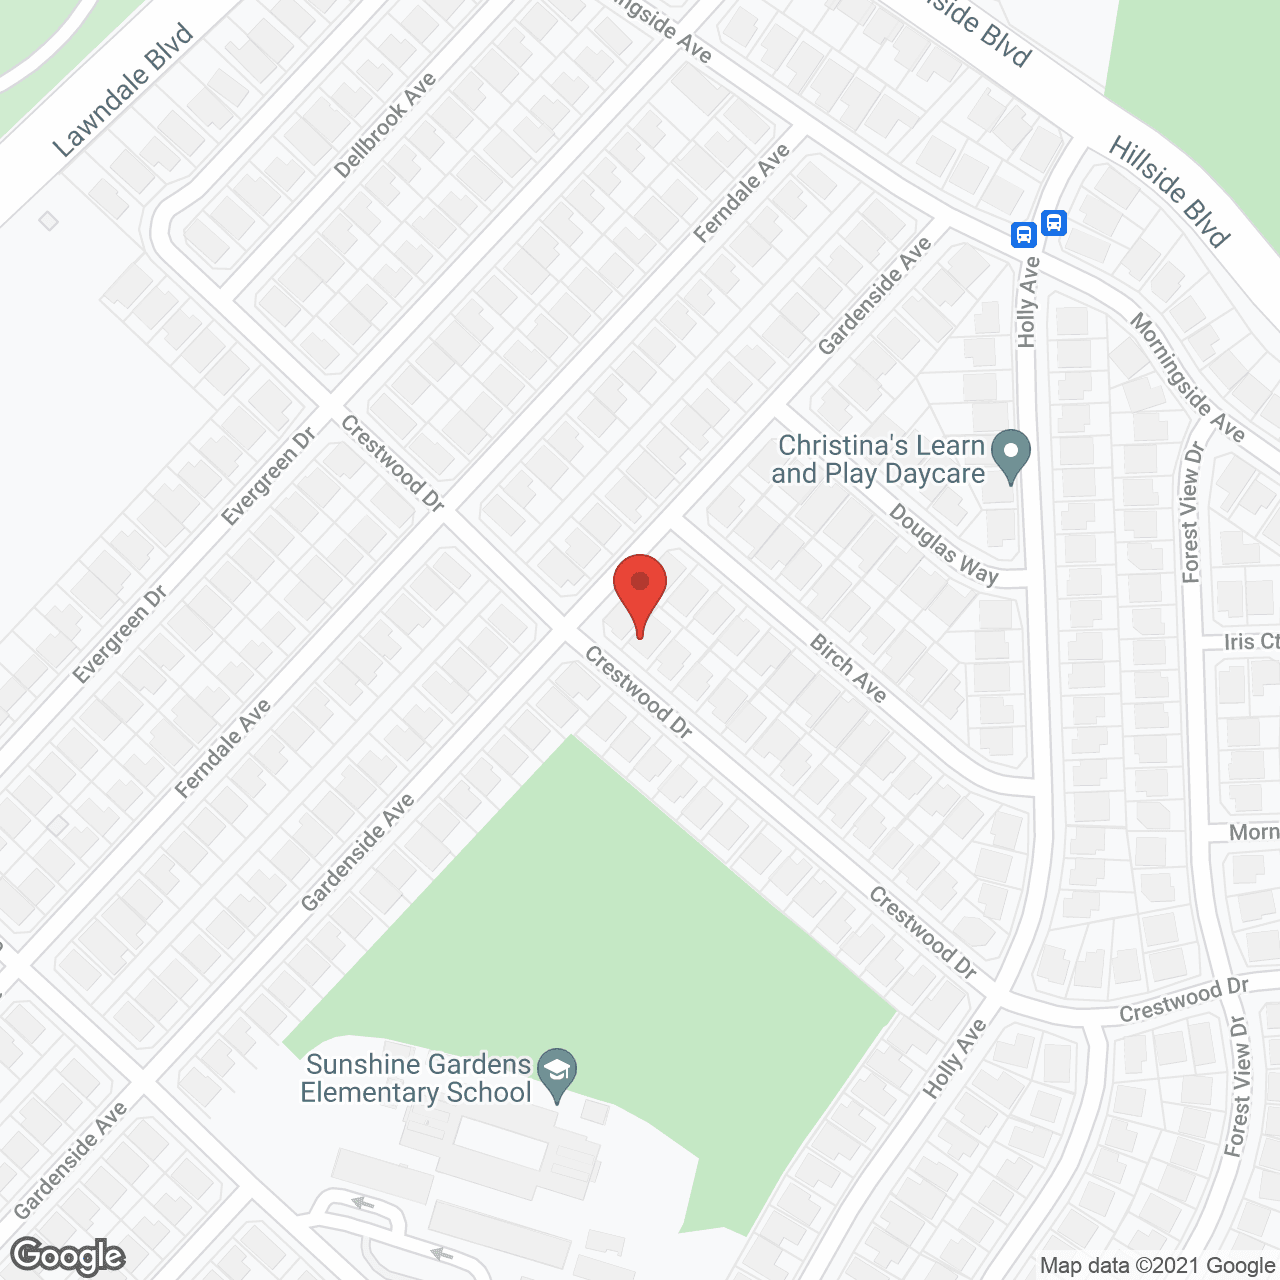 Victoria Residential Care Facility for the Elderly in google map